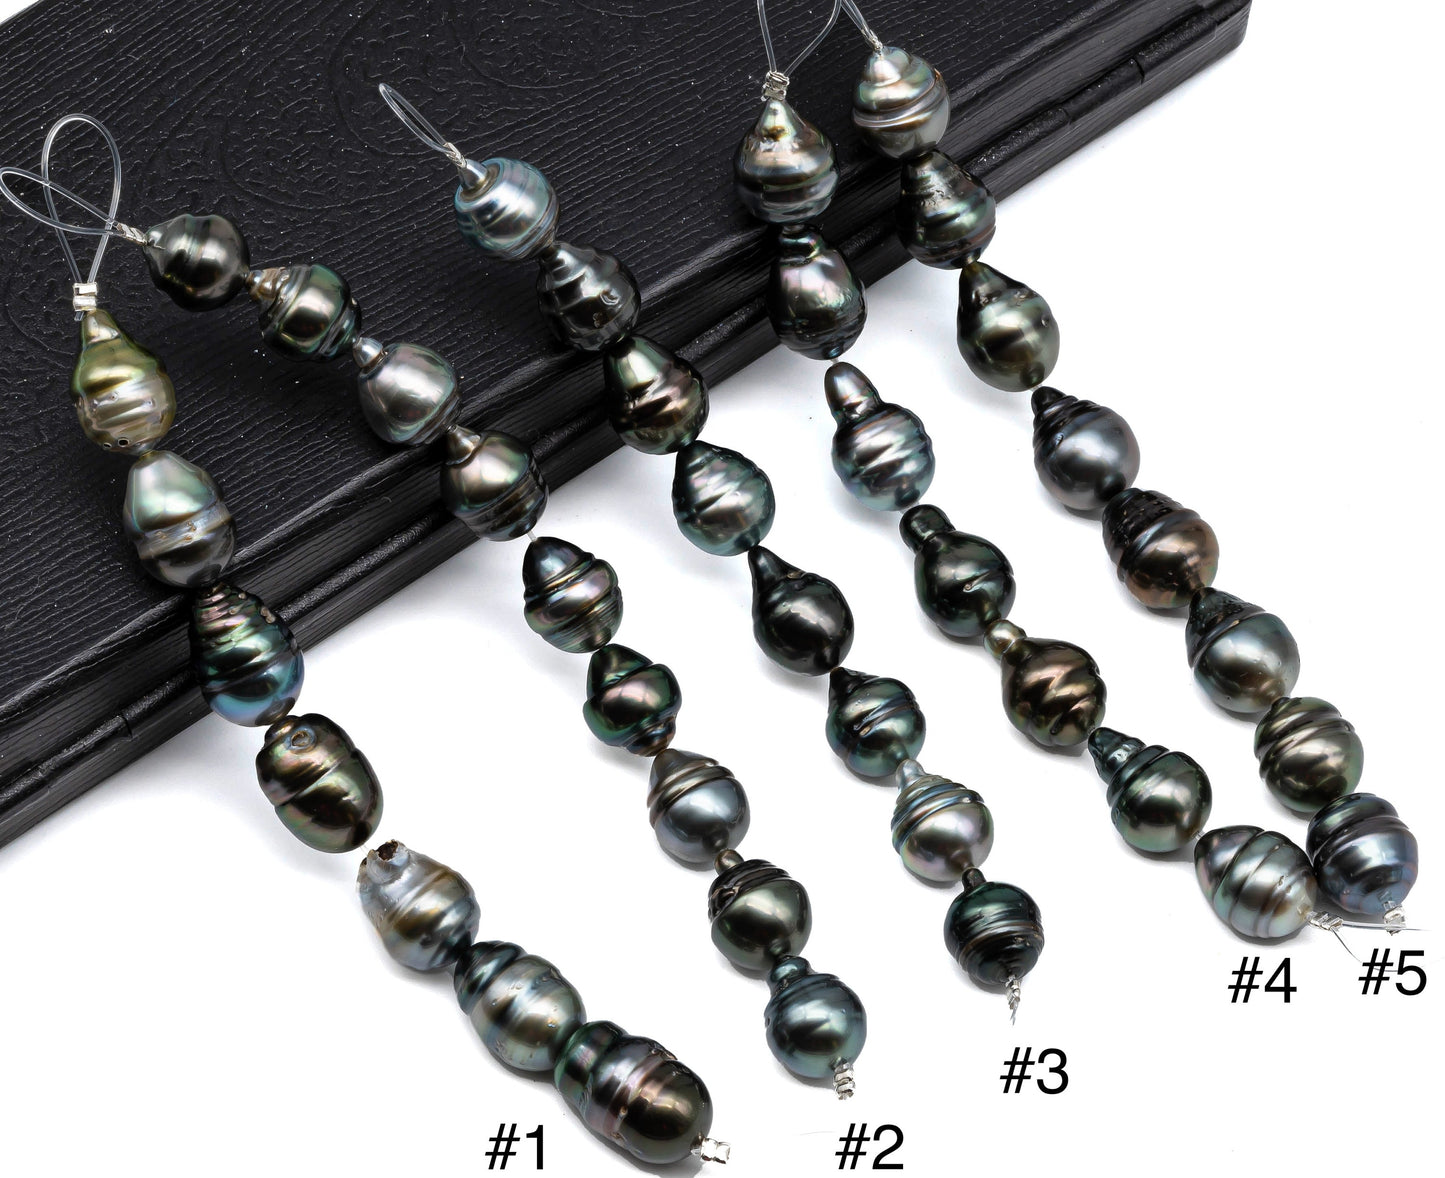 Tahitian Pearls in Multi-color Teardrop Circled with Extremely Nice Luster and Blemishes, 10-11mm in 4 Inches Strand, SKU # 1064TH